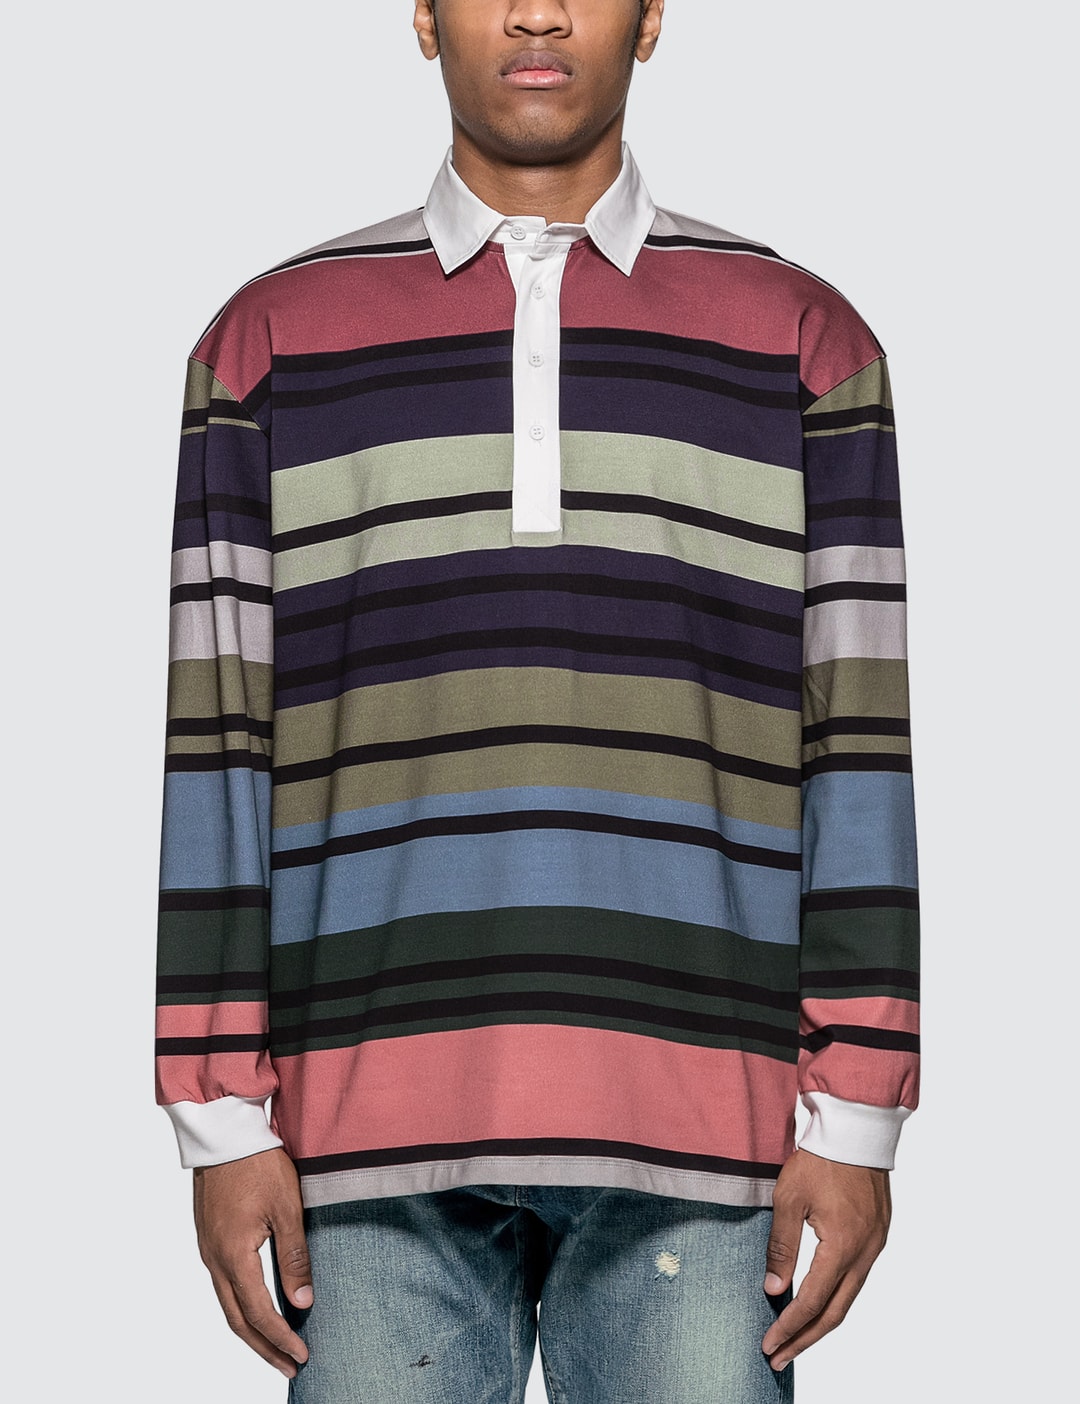 Striped Rugby Jersey Long Sleeve Polo Shirt Placeholder Image